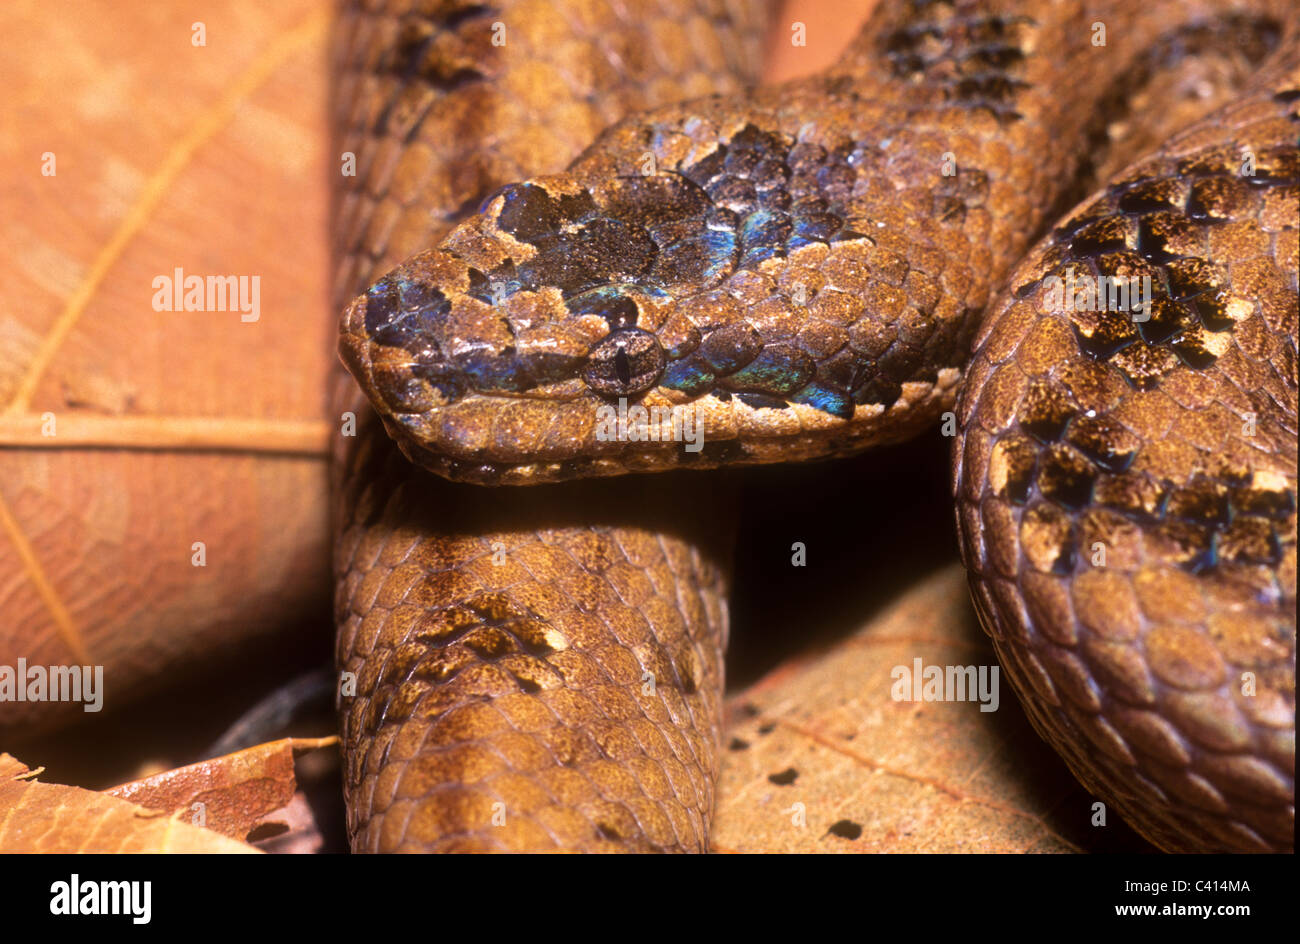 Cuban boa, Epicrates angulifer, this snake is threatened with extinction  Stock Photo - Alamy